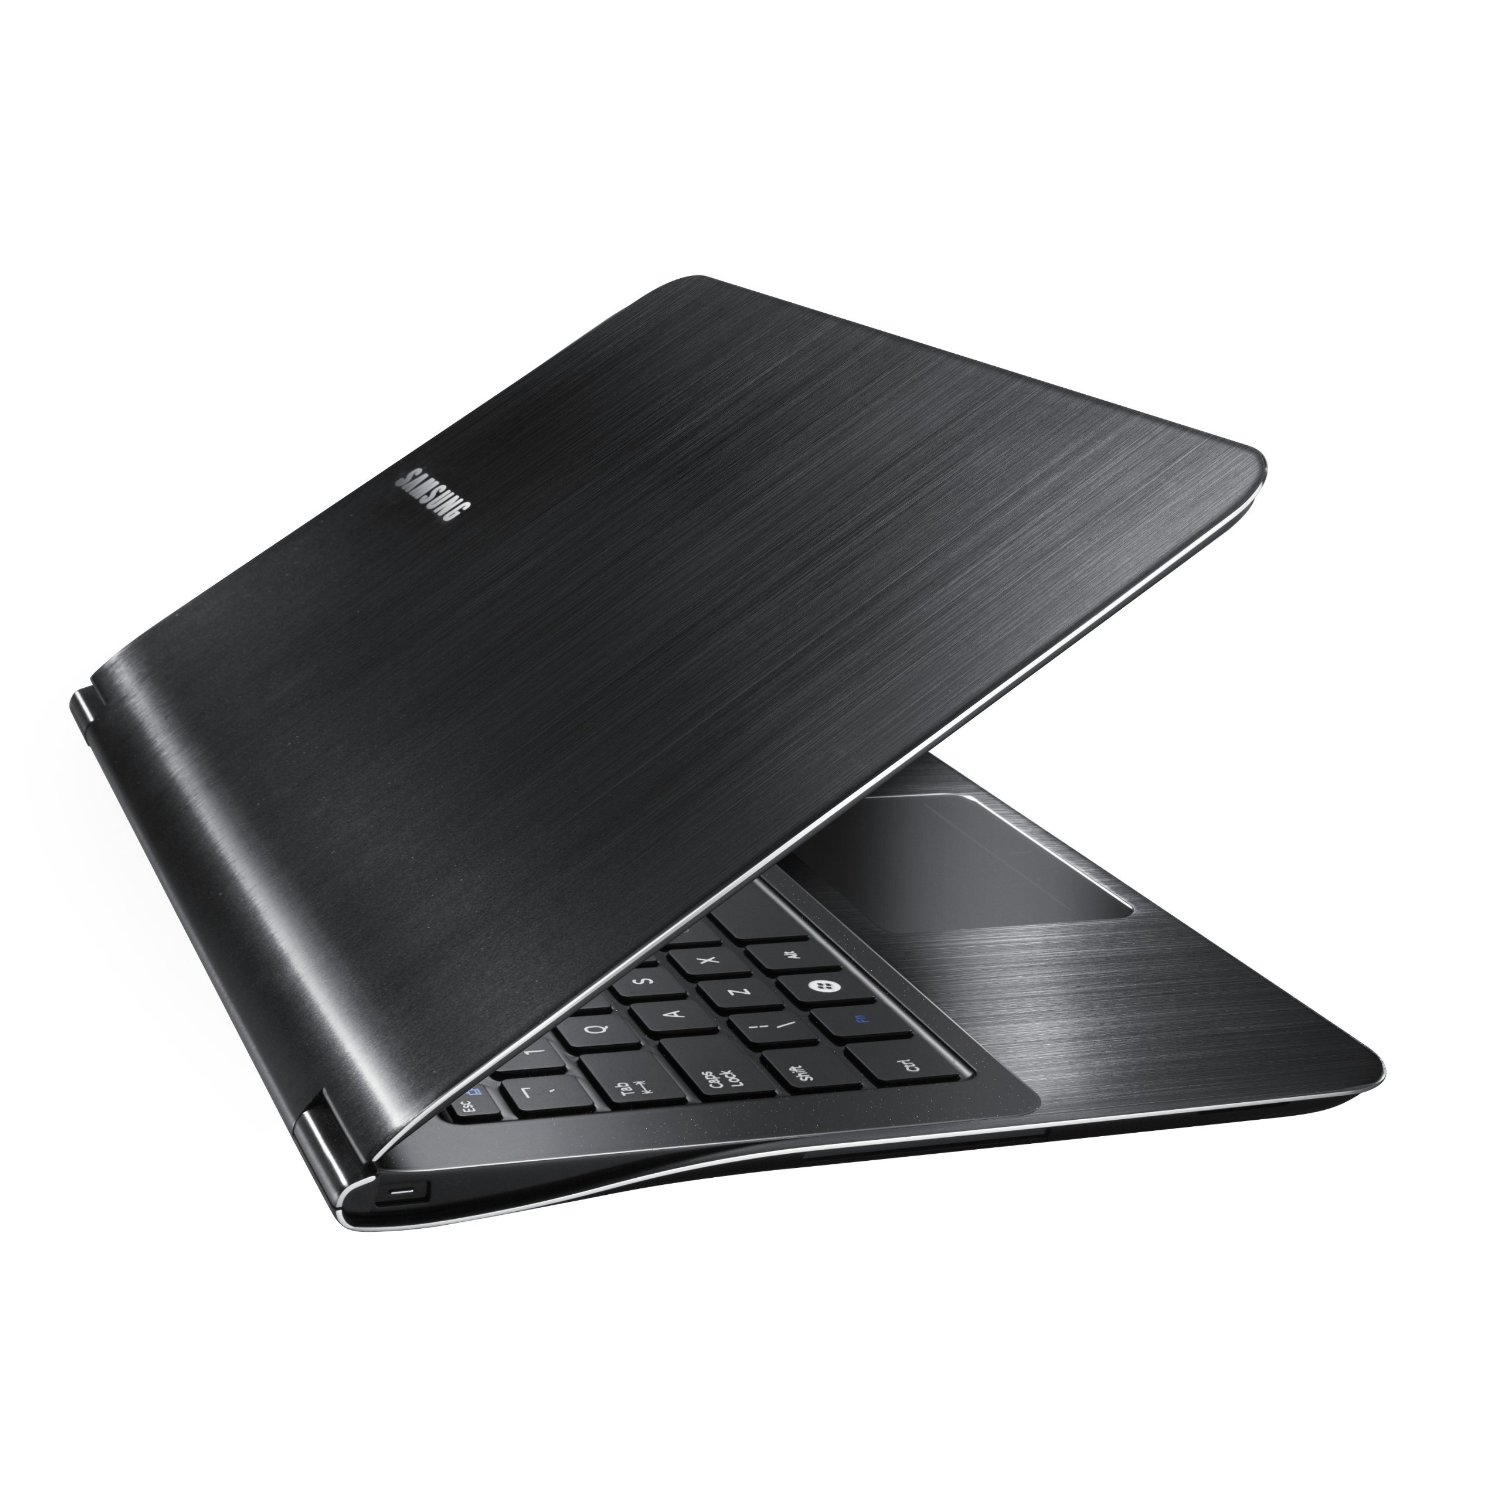 http://thetechjournal.com/wp-content/uploads/images/1108/1312961318-samsung-series-9-np900x3aa02us-133inch-laptop-4.jpg